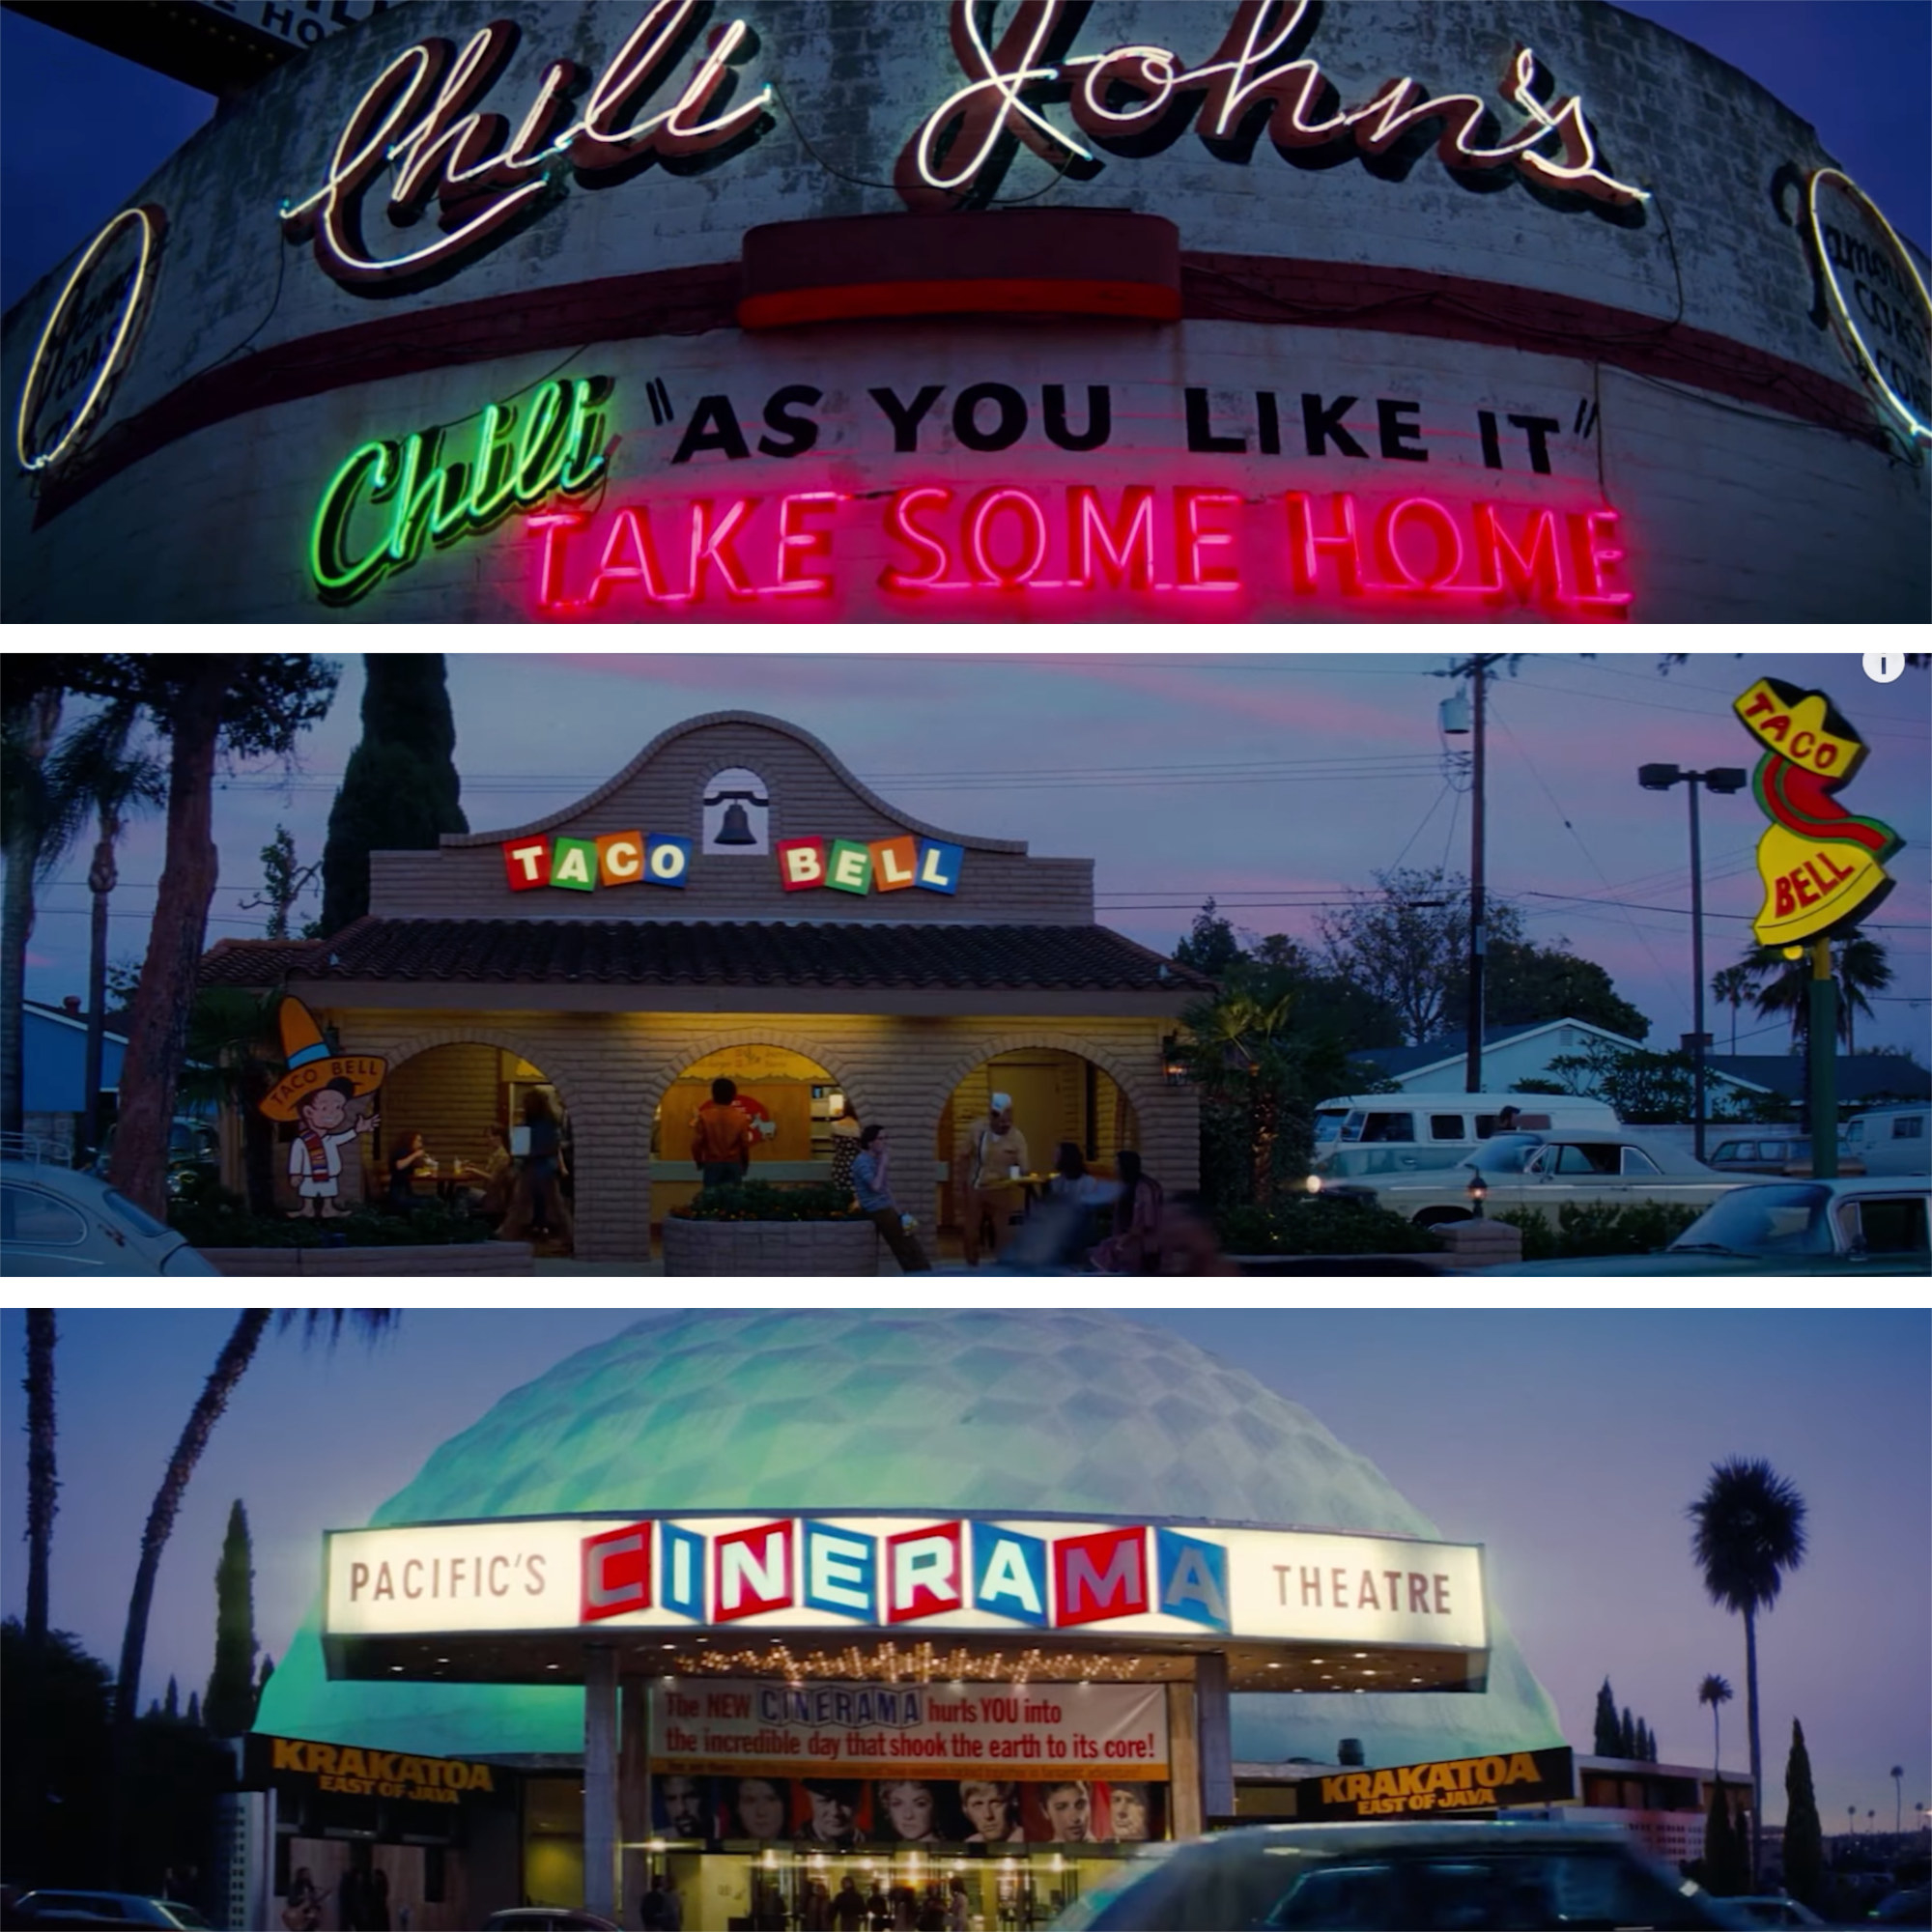 1960s Hollywood set design for Once Upon a Time in Hollywood film